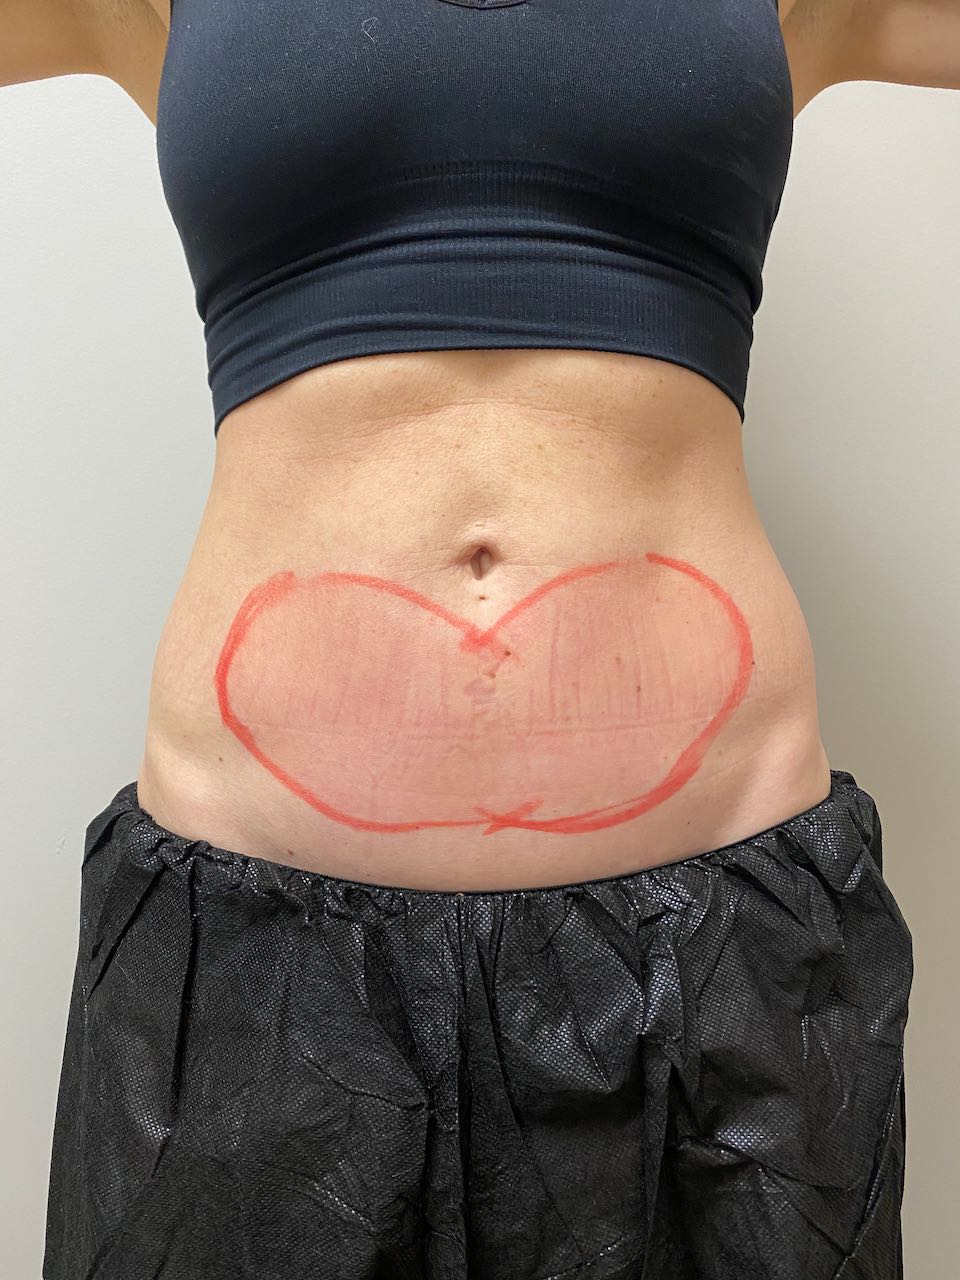 CoolSculpting®, Before & After Photos